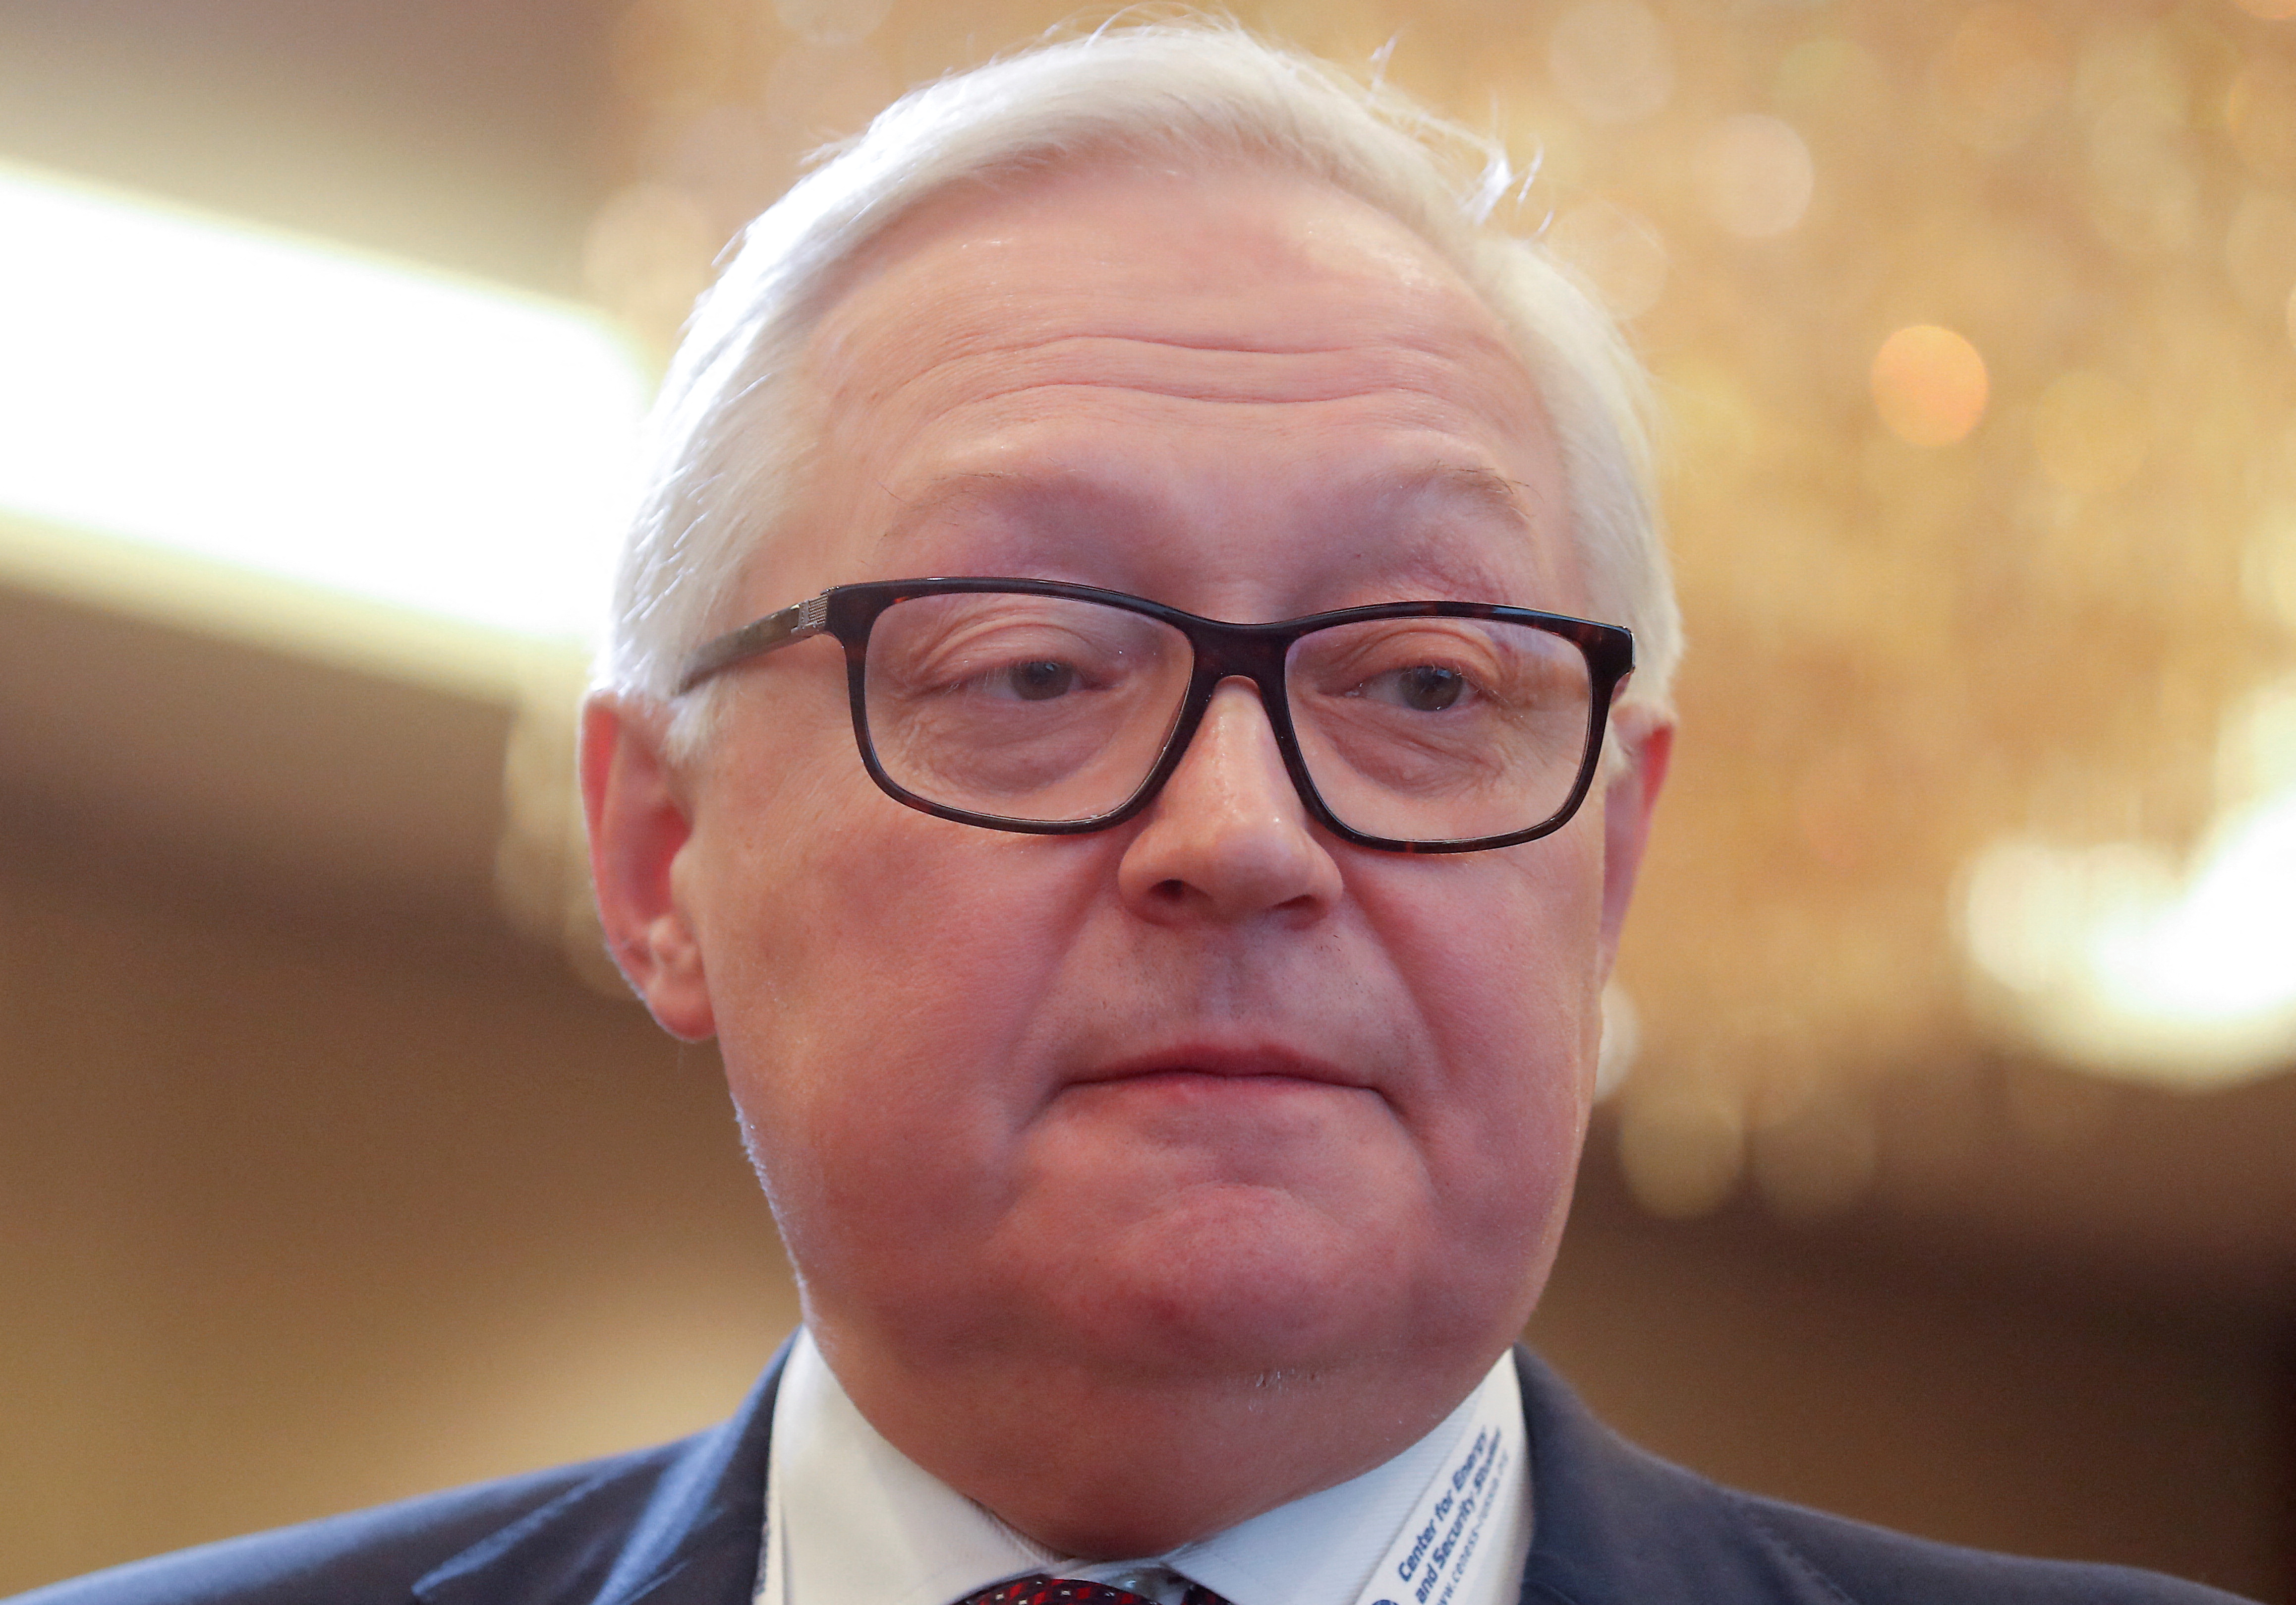 Russian Deputy Foreign Minister Sergei Ryabkov attends the Moscow Nonproliferation Conference in Moscow, Russia November 8, 2019. REUTERS/Maxim Shemetov/File Photo